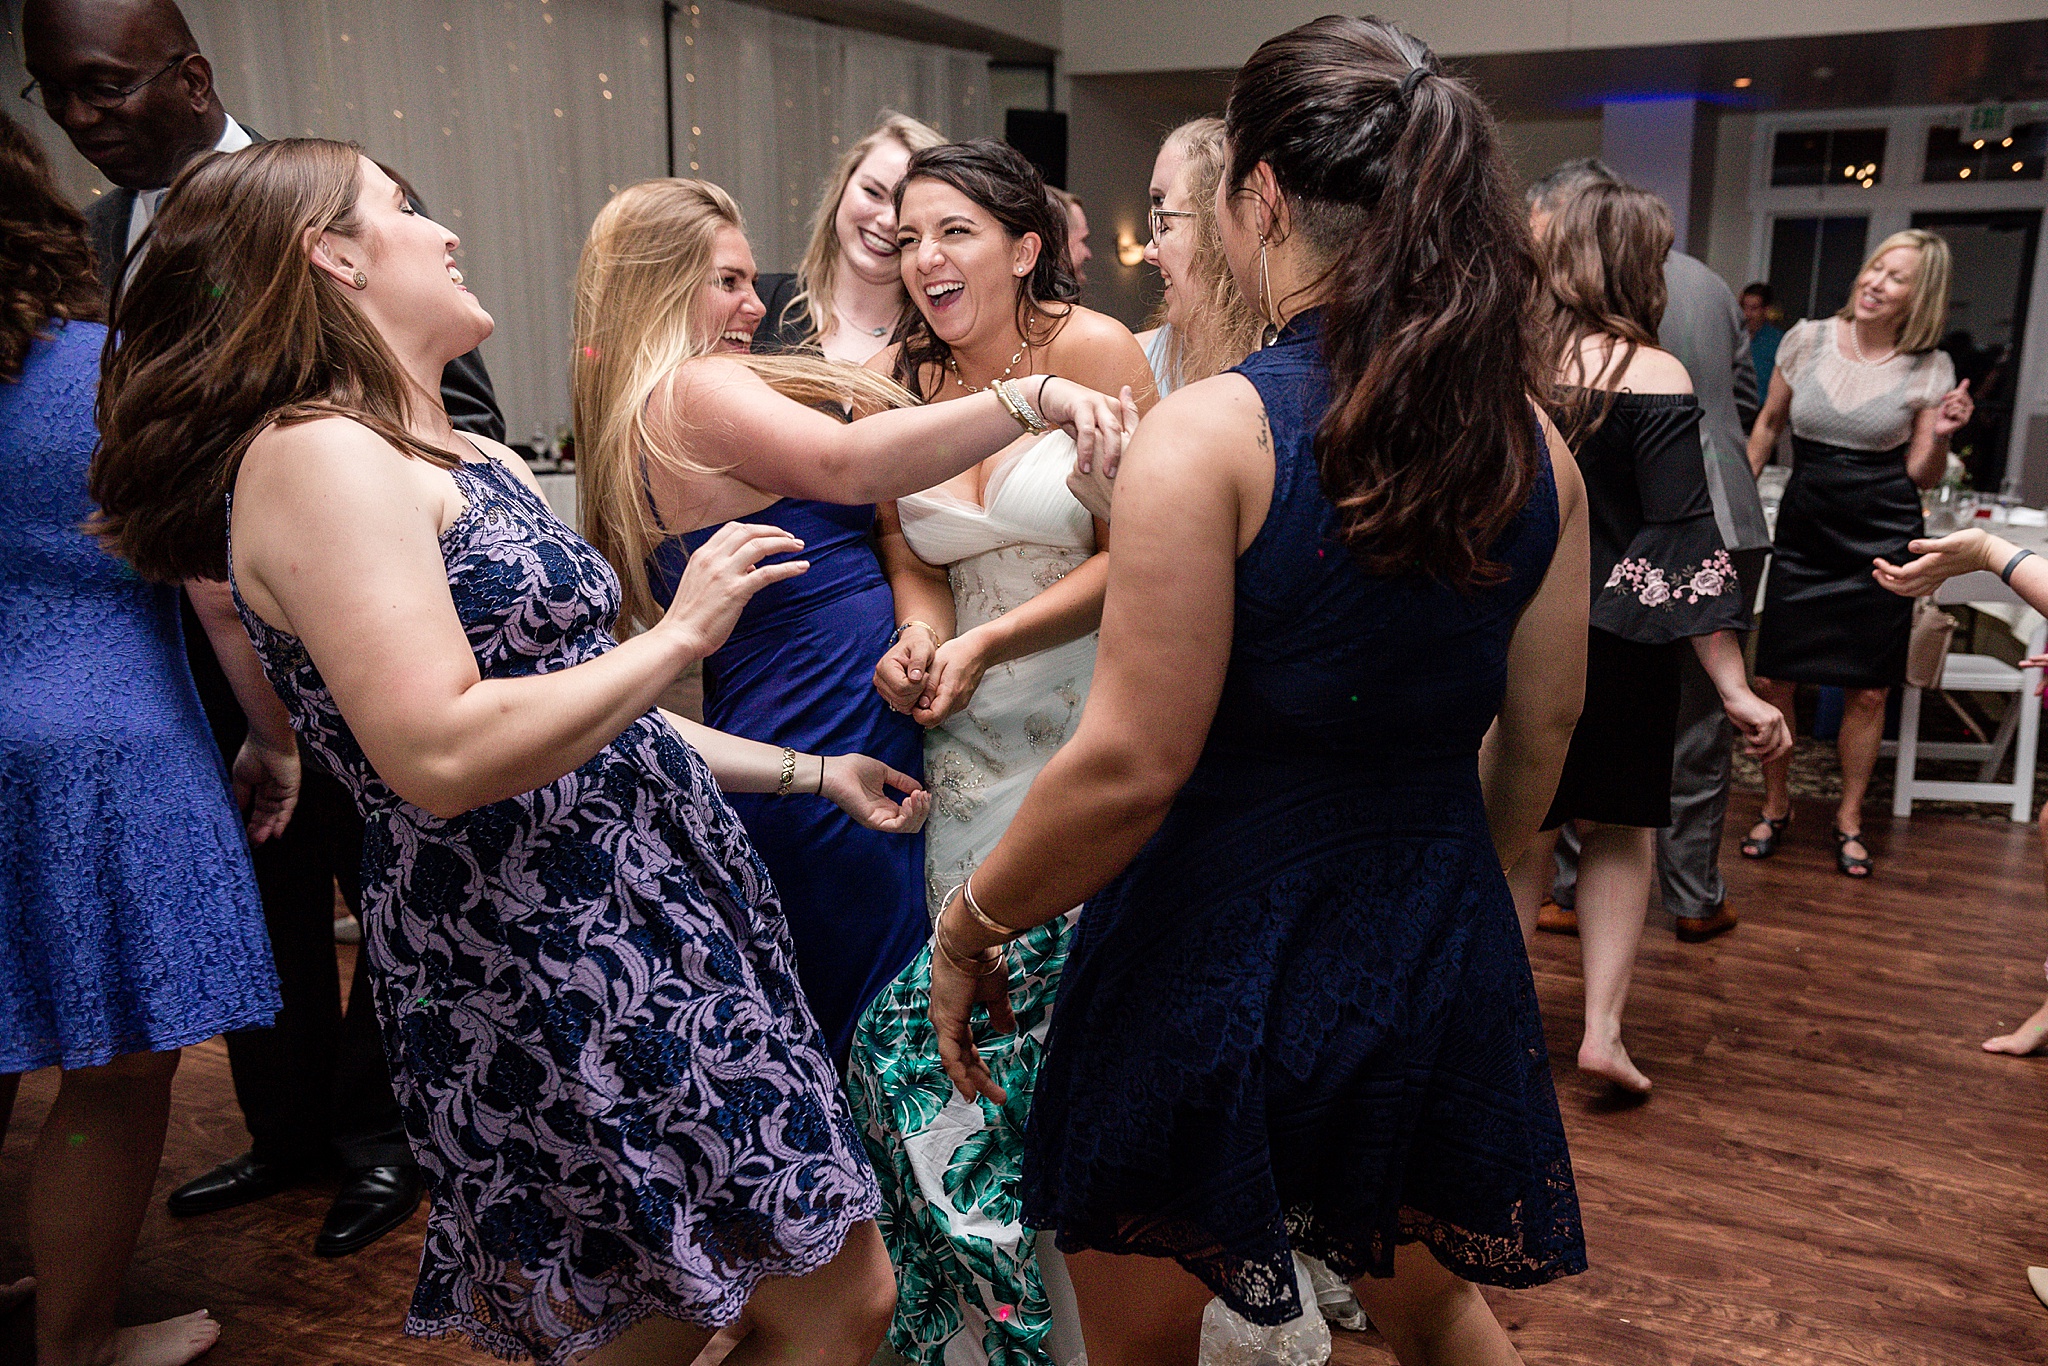 Bride and guests dancing during the wedding reception. Tania & Chris' Denver Wedding at the Wedgewood Ken Caryl by Colorado Wedding Photography, Jennifer Garza. Colorado Wedding Photographer, Colorado Wedding Photography, Denver Wedding Photographer, Denver Wedding Photography, US Marine Corp Wedding, US Marine Corp, Military Wedding, US Marines, Wedgewood Weddings, Wedgewood Weddings Ken Caryl, Colorado Wedding, Denver Wedding, Wedding Photographer, Colorado Bride, Brides of Colorado